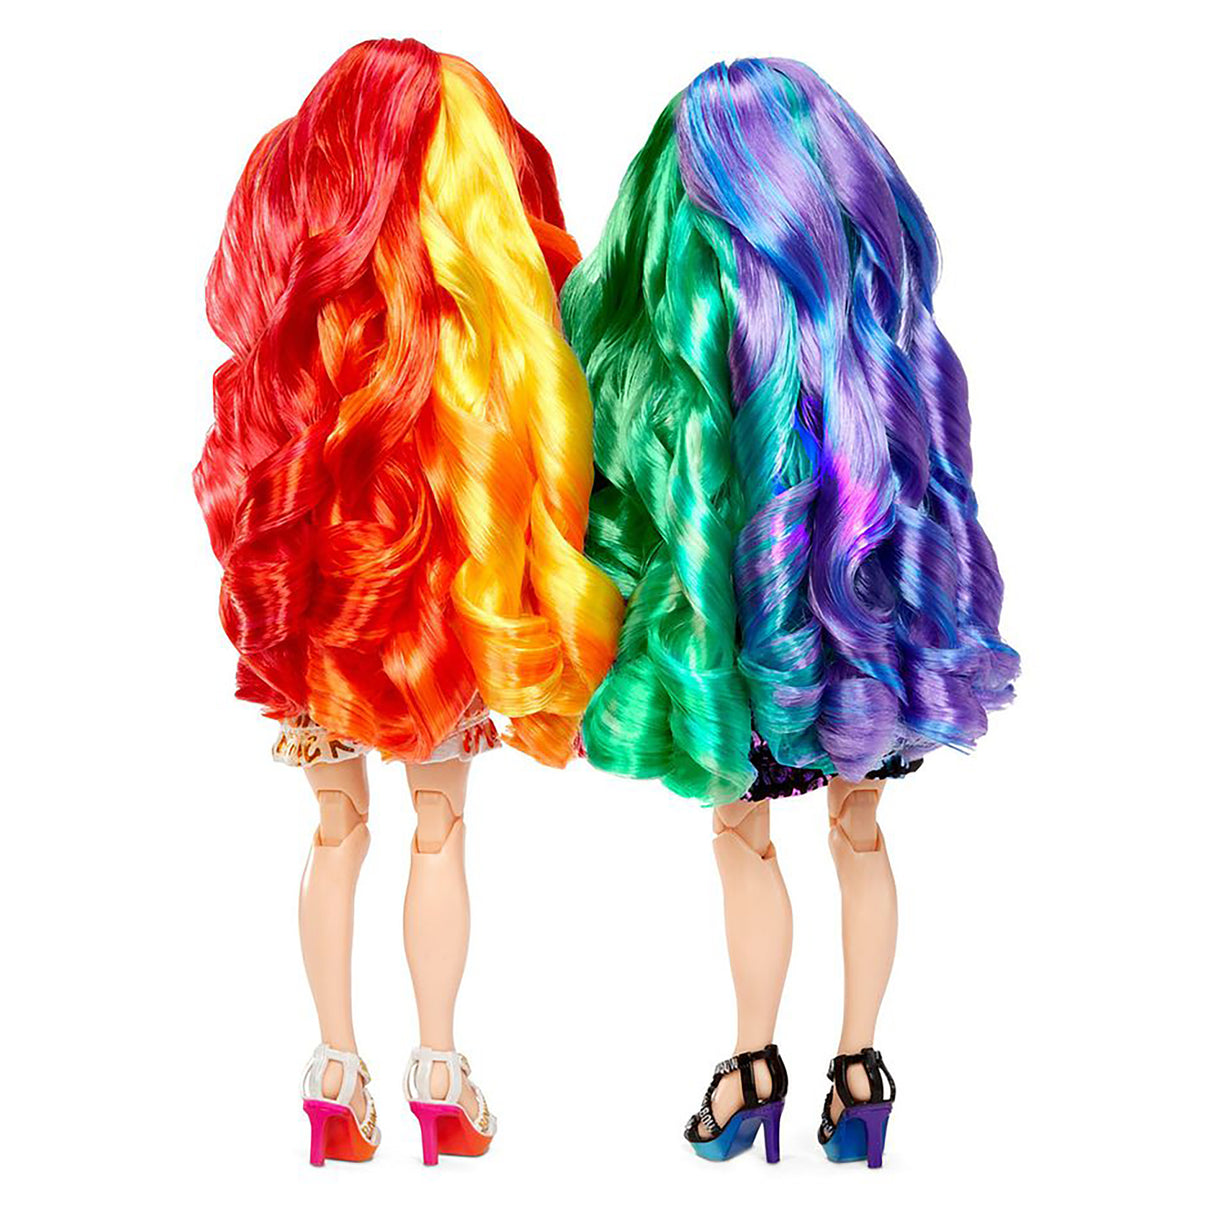 Rainbow High Twins - Laurel & Holly DeVious (Pack of 2)